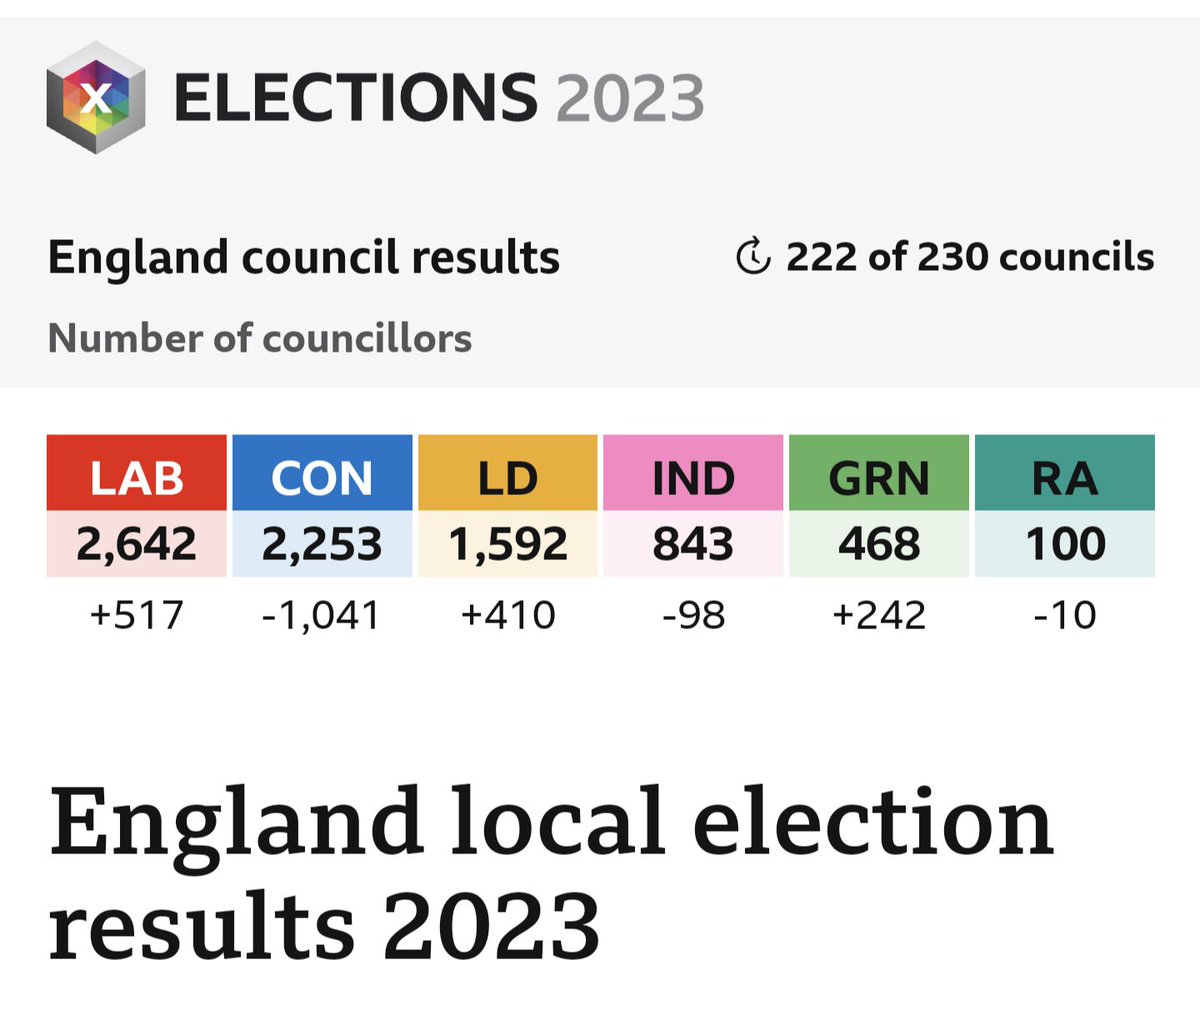 They lost over 1000 seats!

#LocalElection2023 
#Conservatives